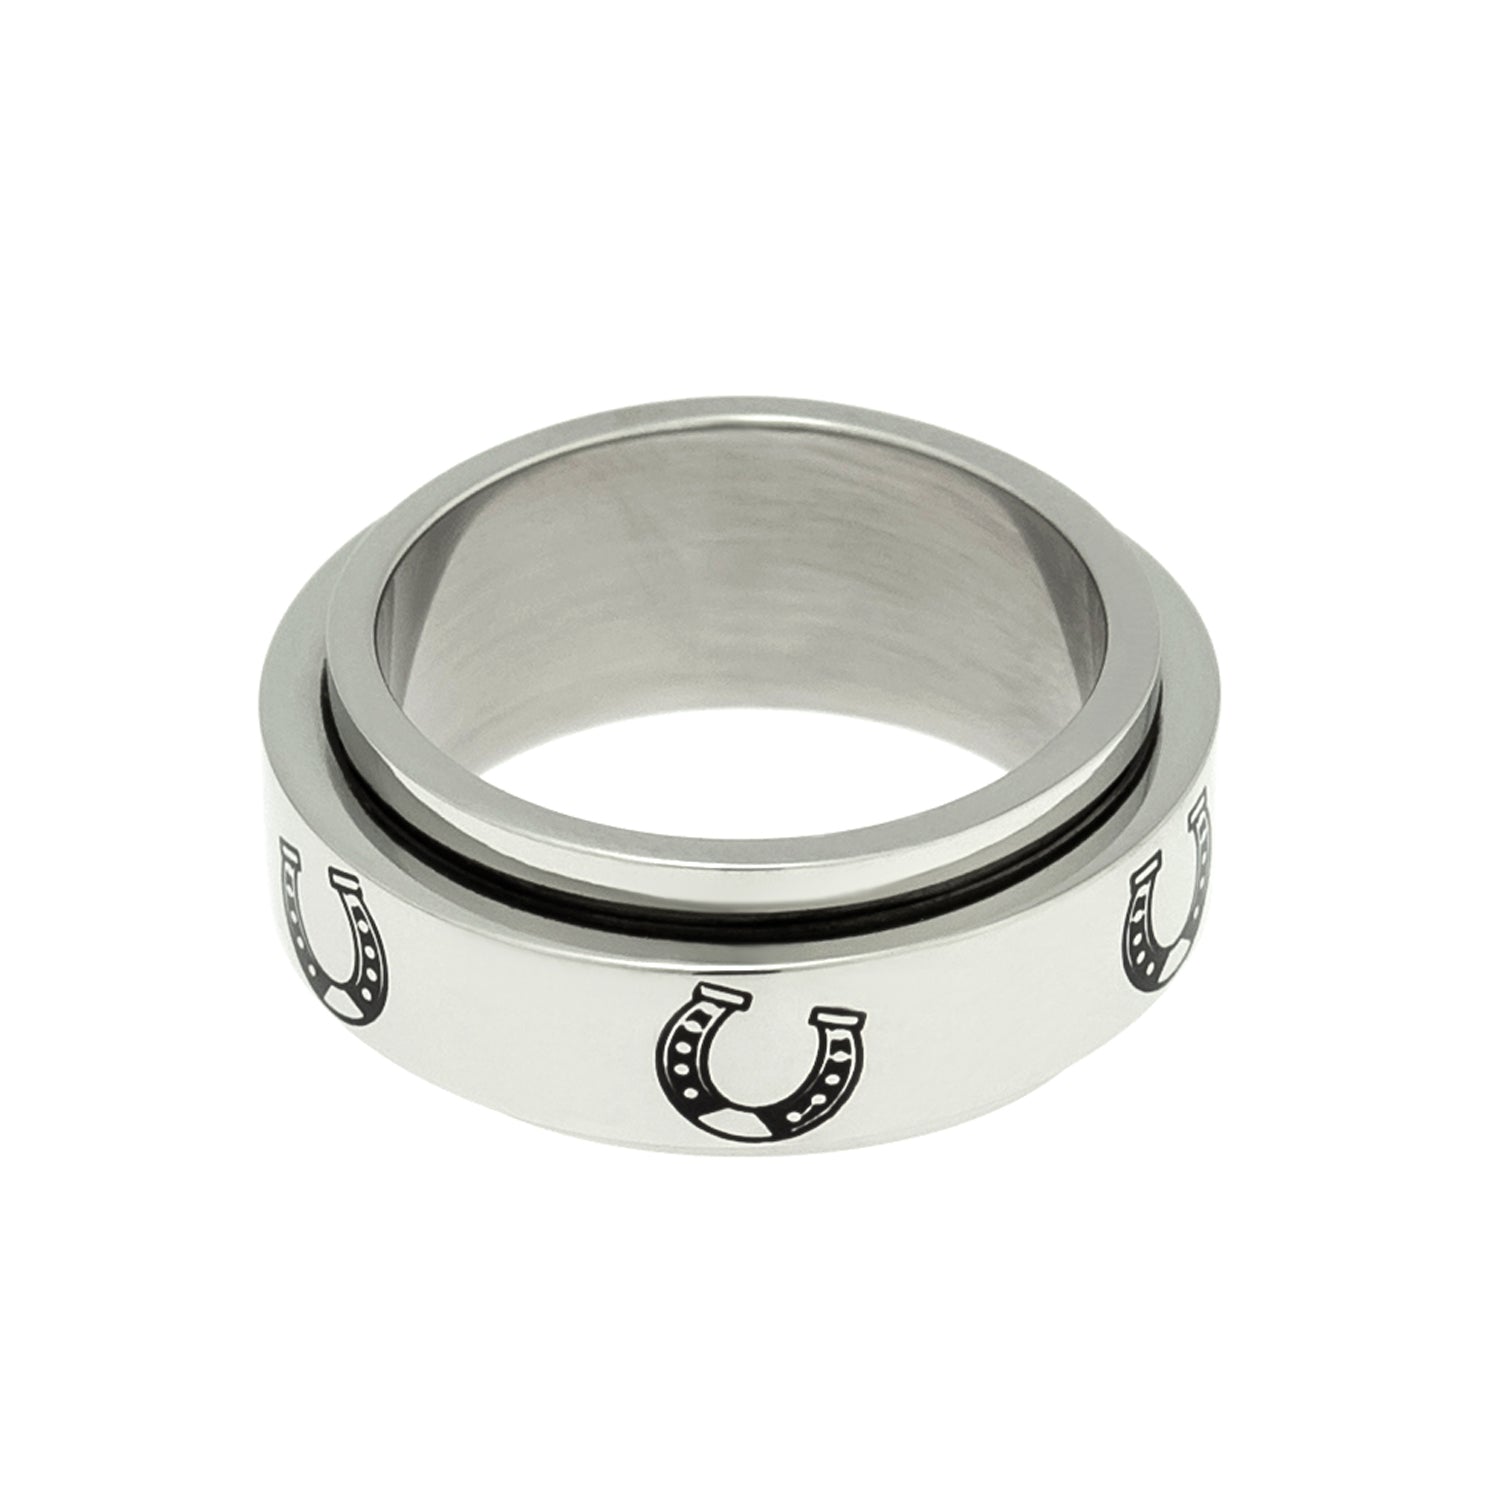 Stainless Steel Lucky Horseshoe Spinner Ring - Equestrian Jewelry Gift for Horse Lovers